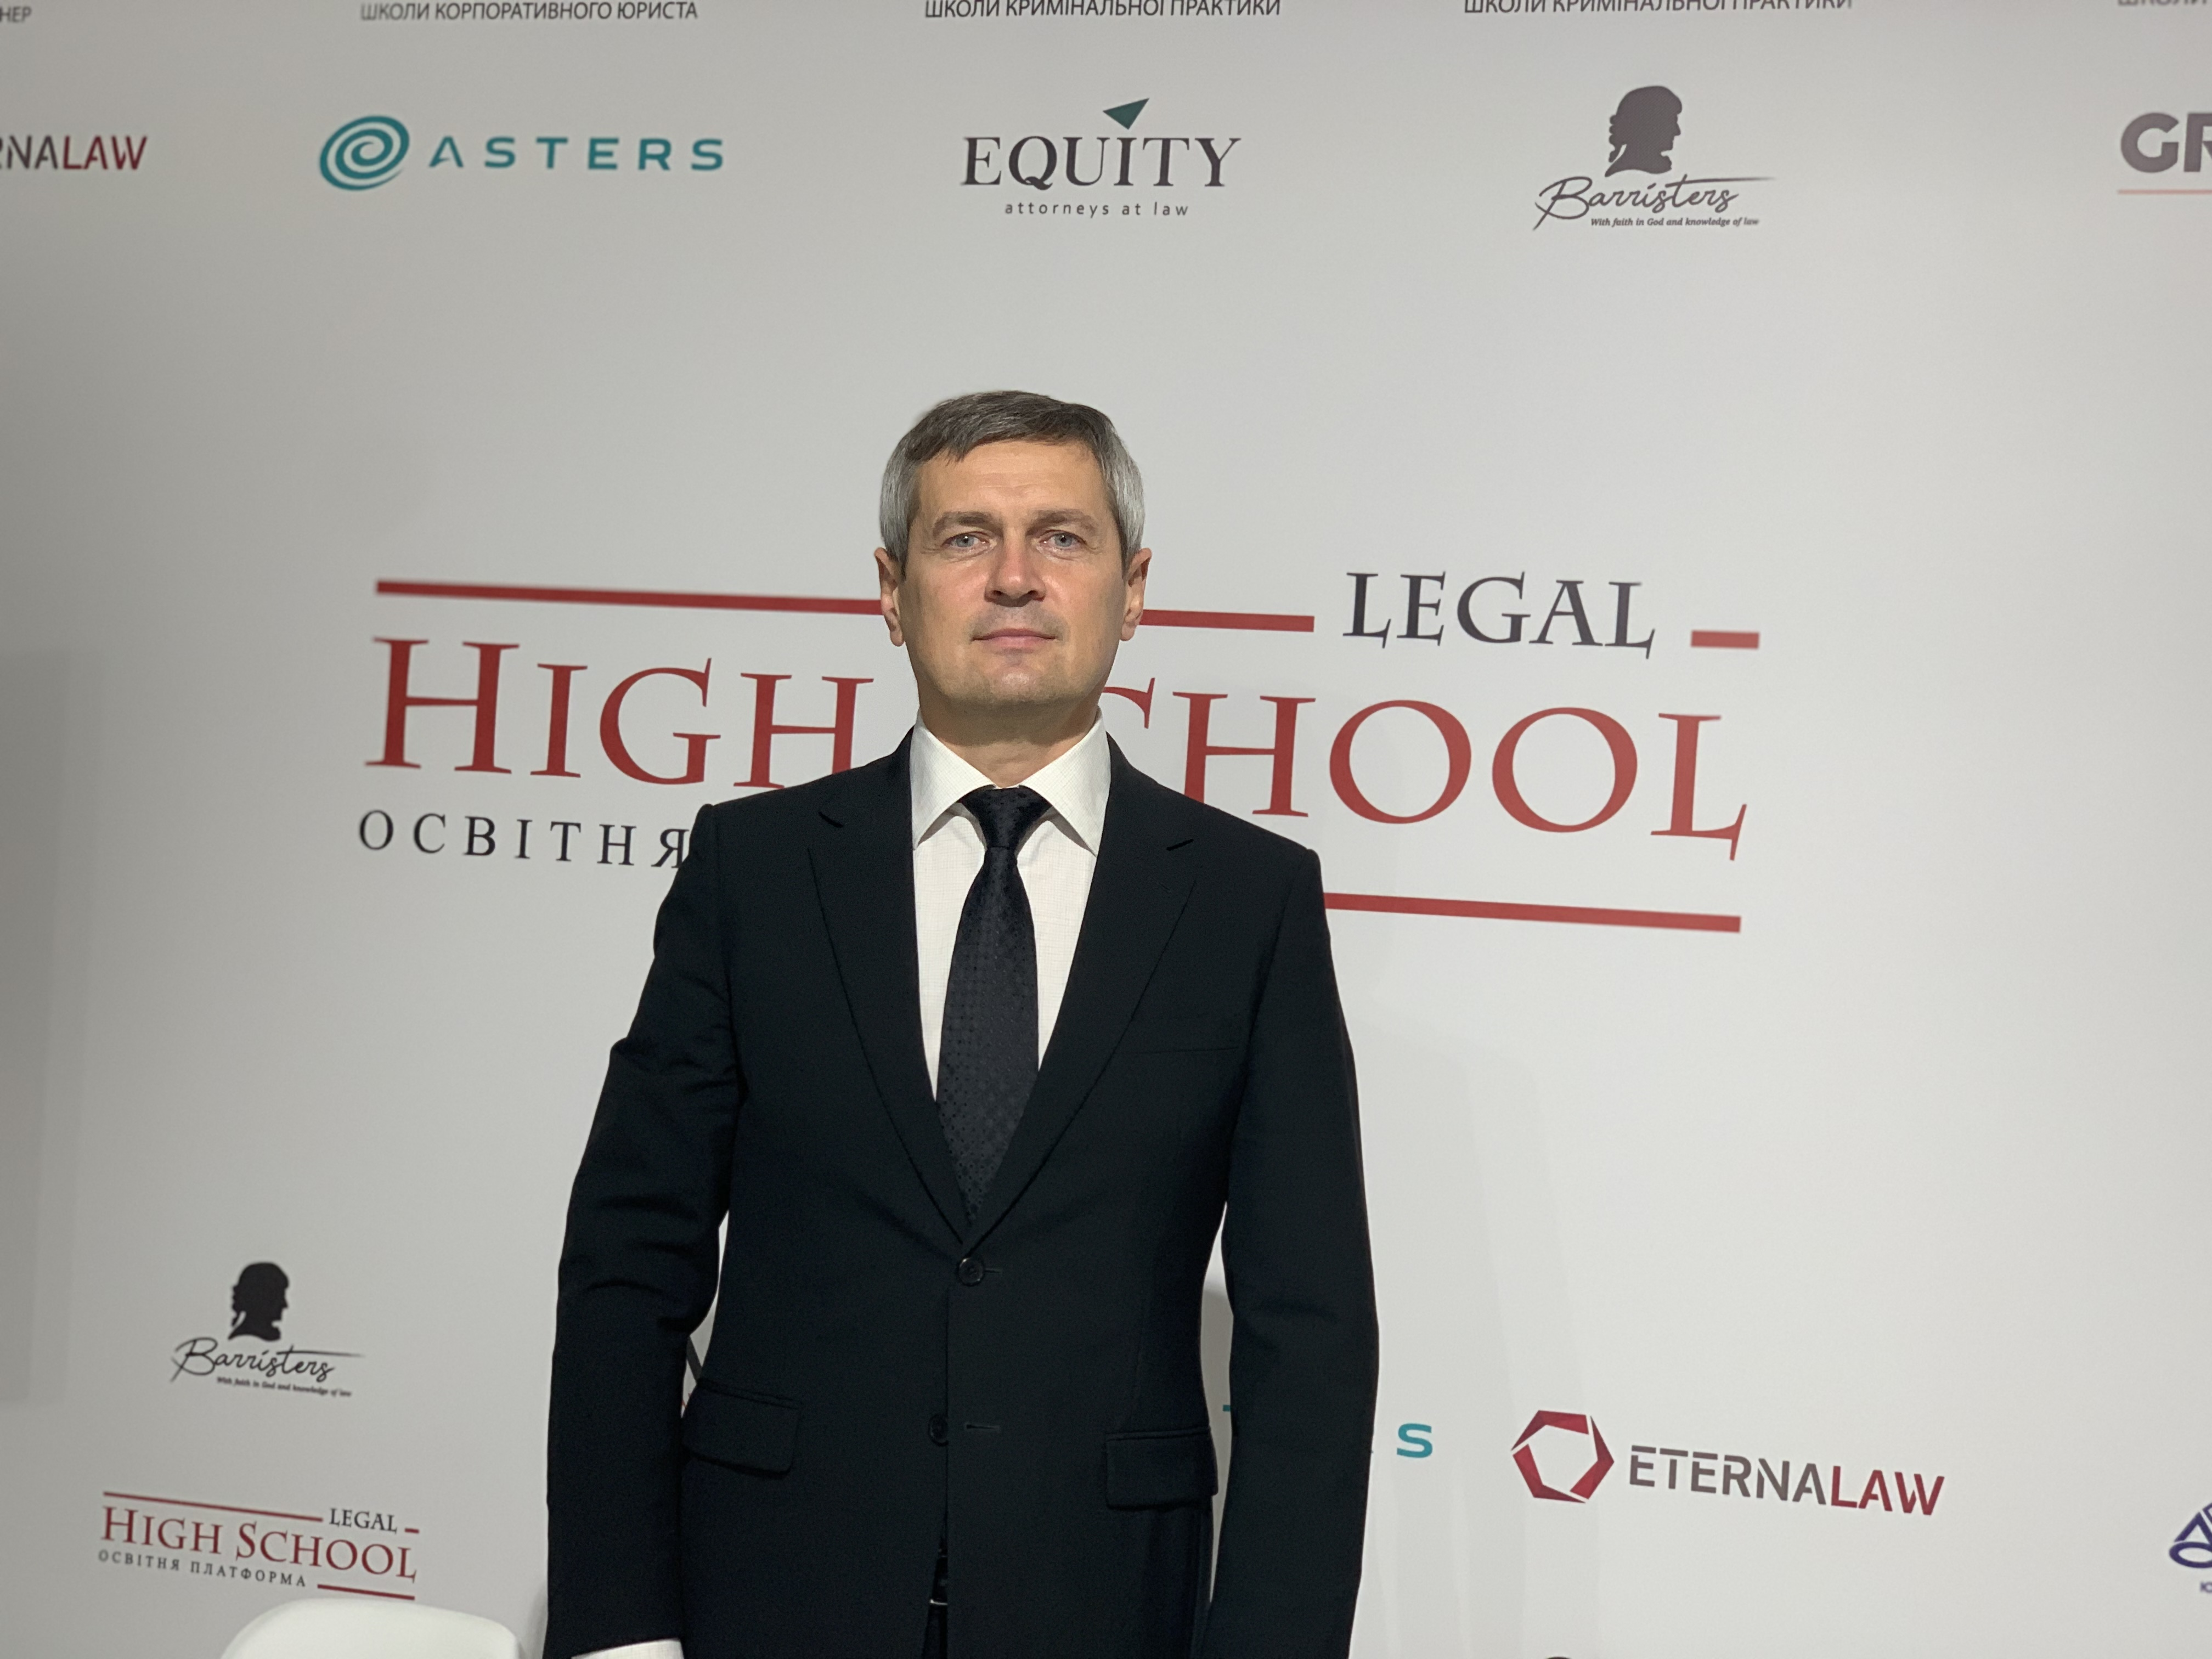 EQUITY Partner Oleksander Lysak Speaks at Legal High School to Share Experience of Working on High-Profile Case of Volodymyr Omelian